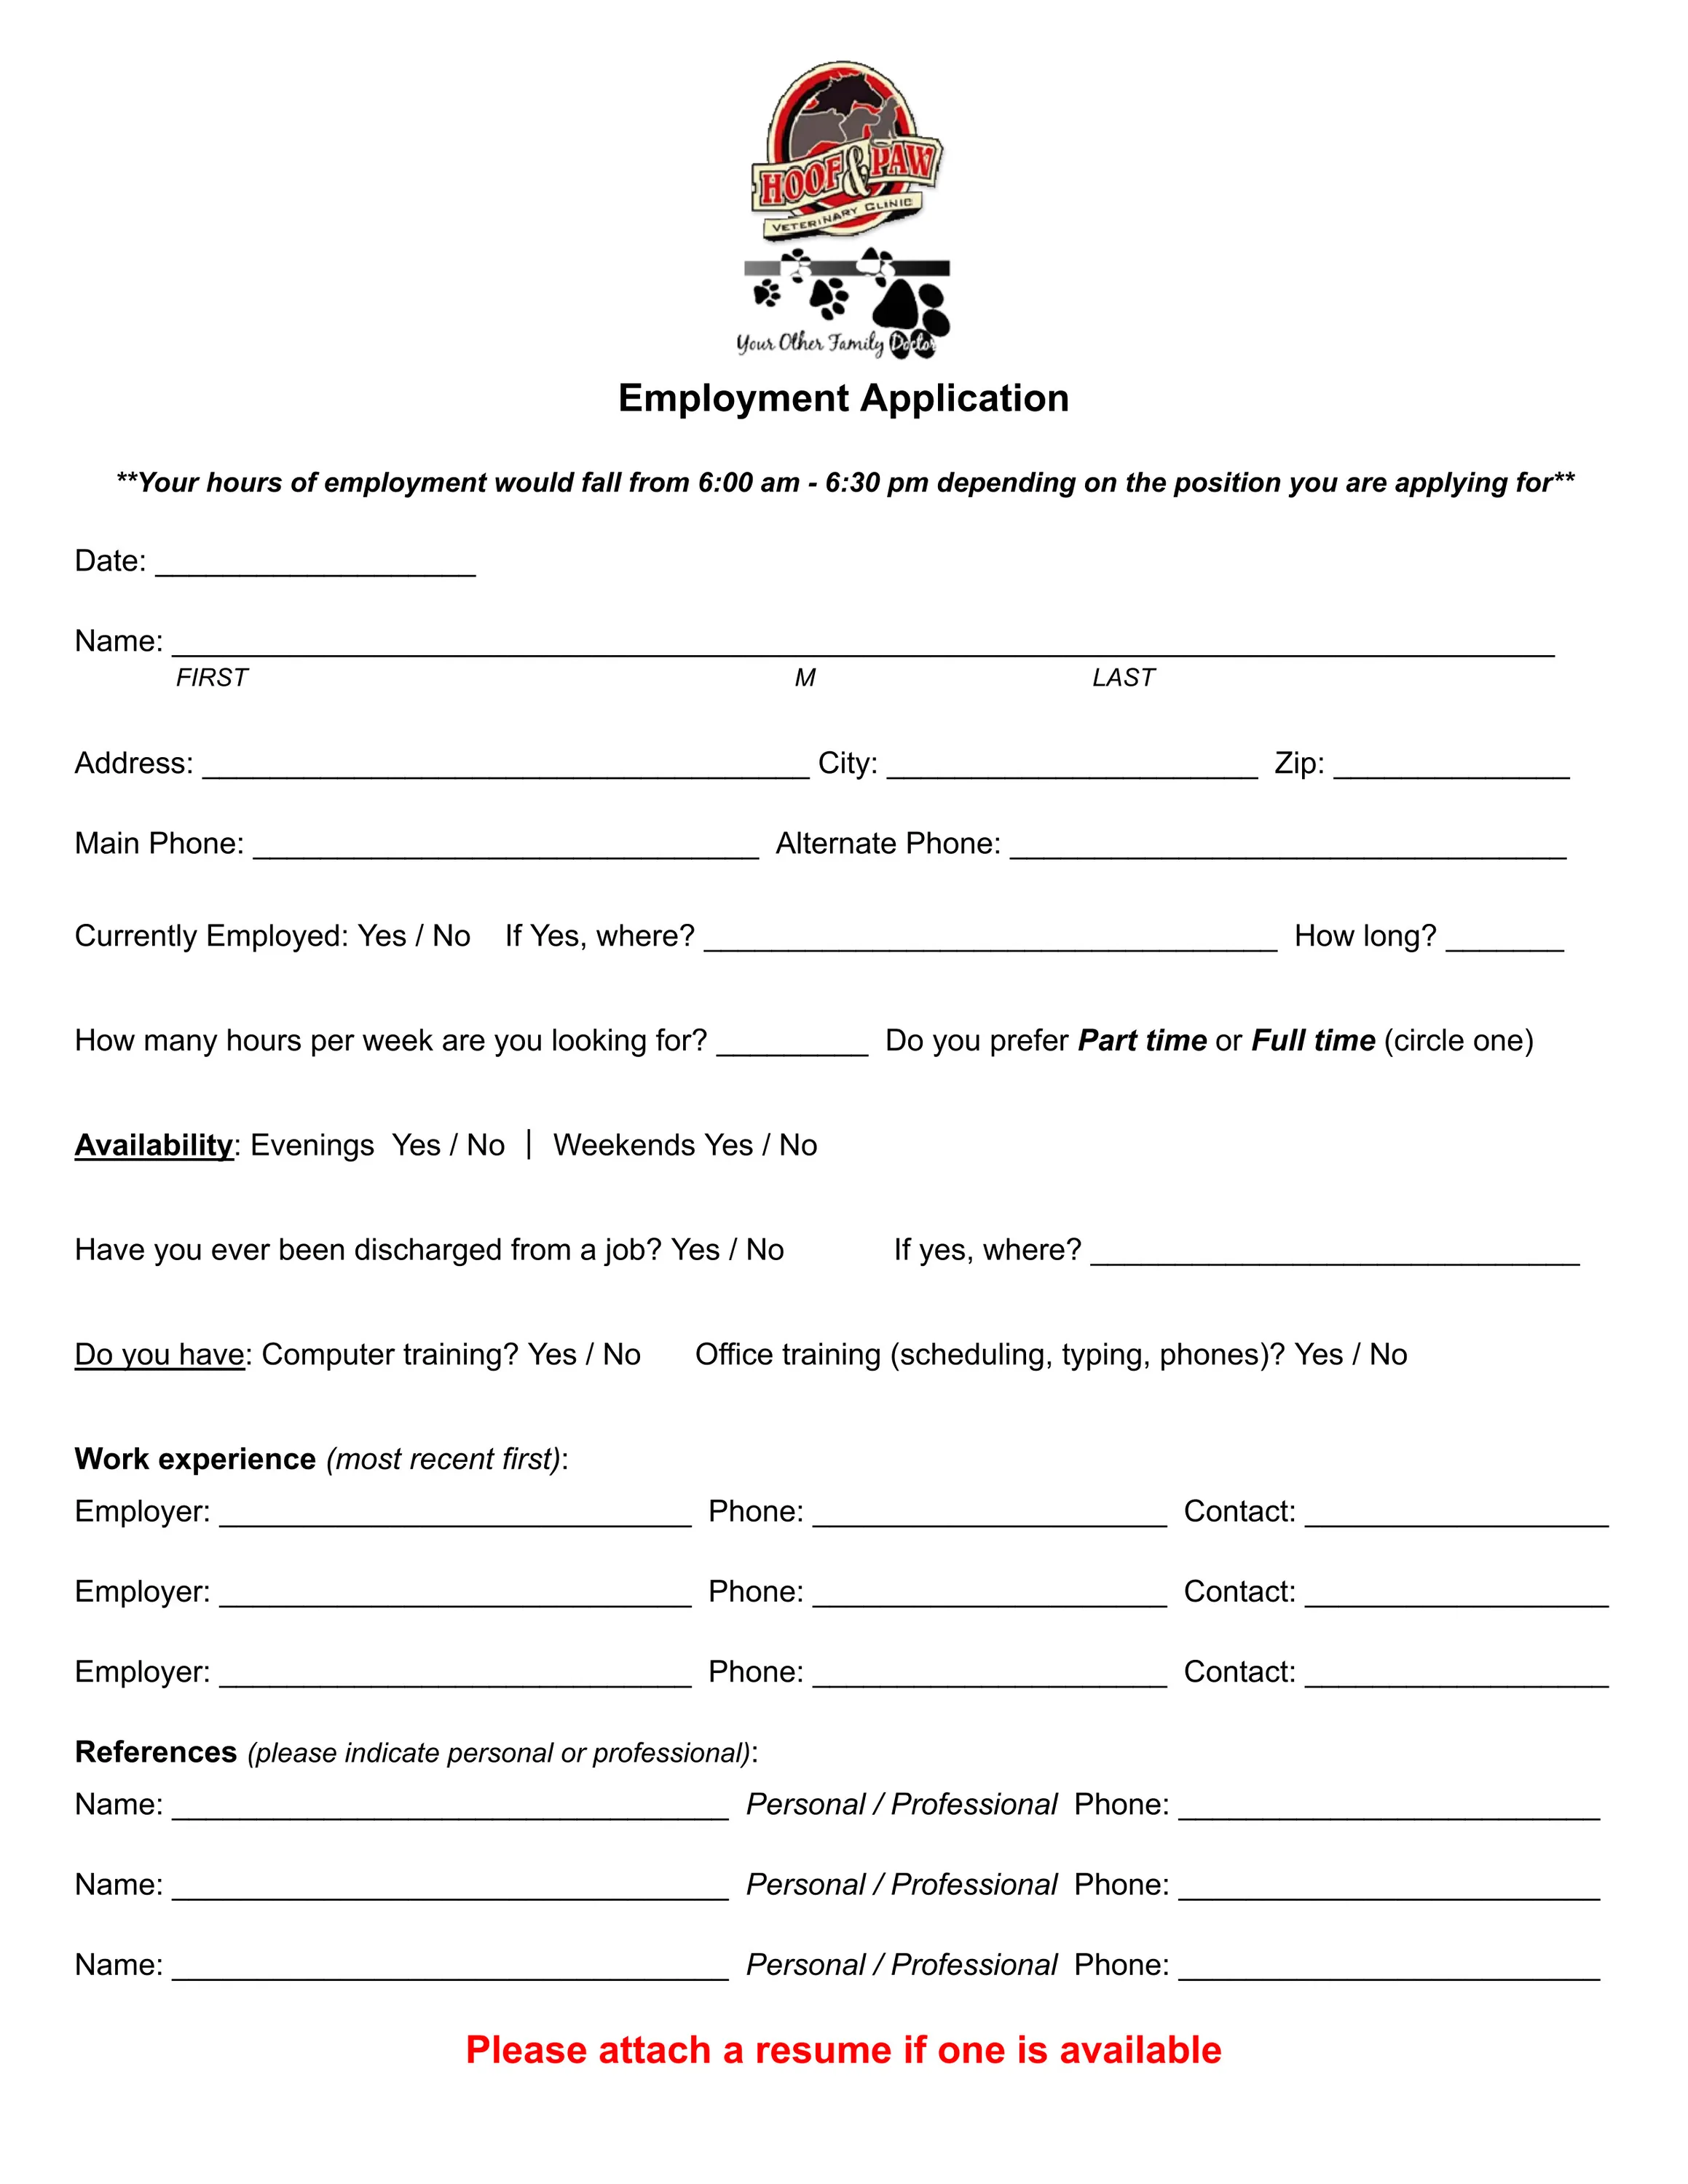 Hoof and Paw Employment Application